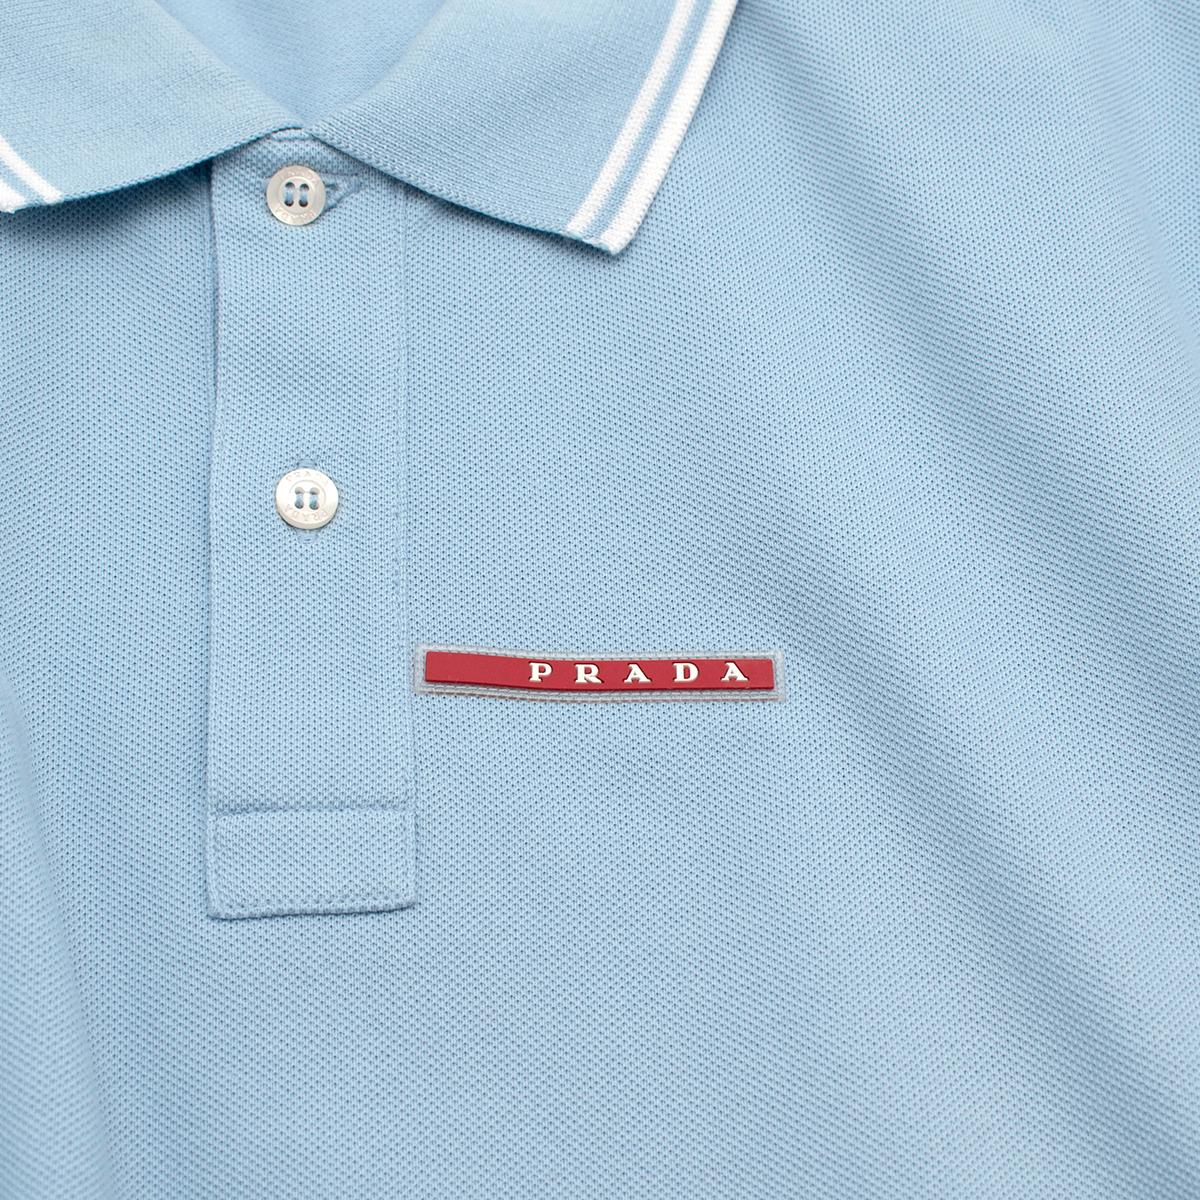 Prada Baby Blue Short Sleeve Polo Shirt In Excellent Condition For Sale In London, GB